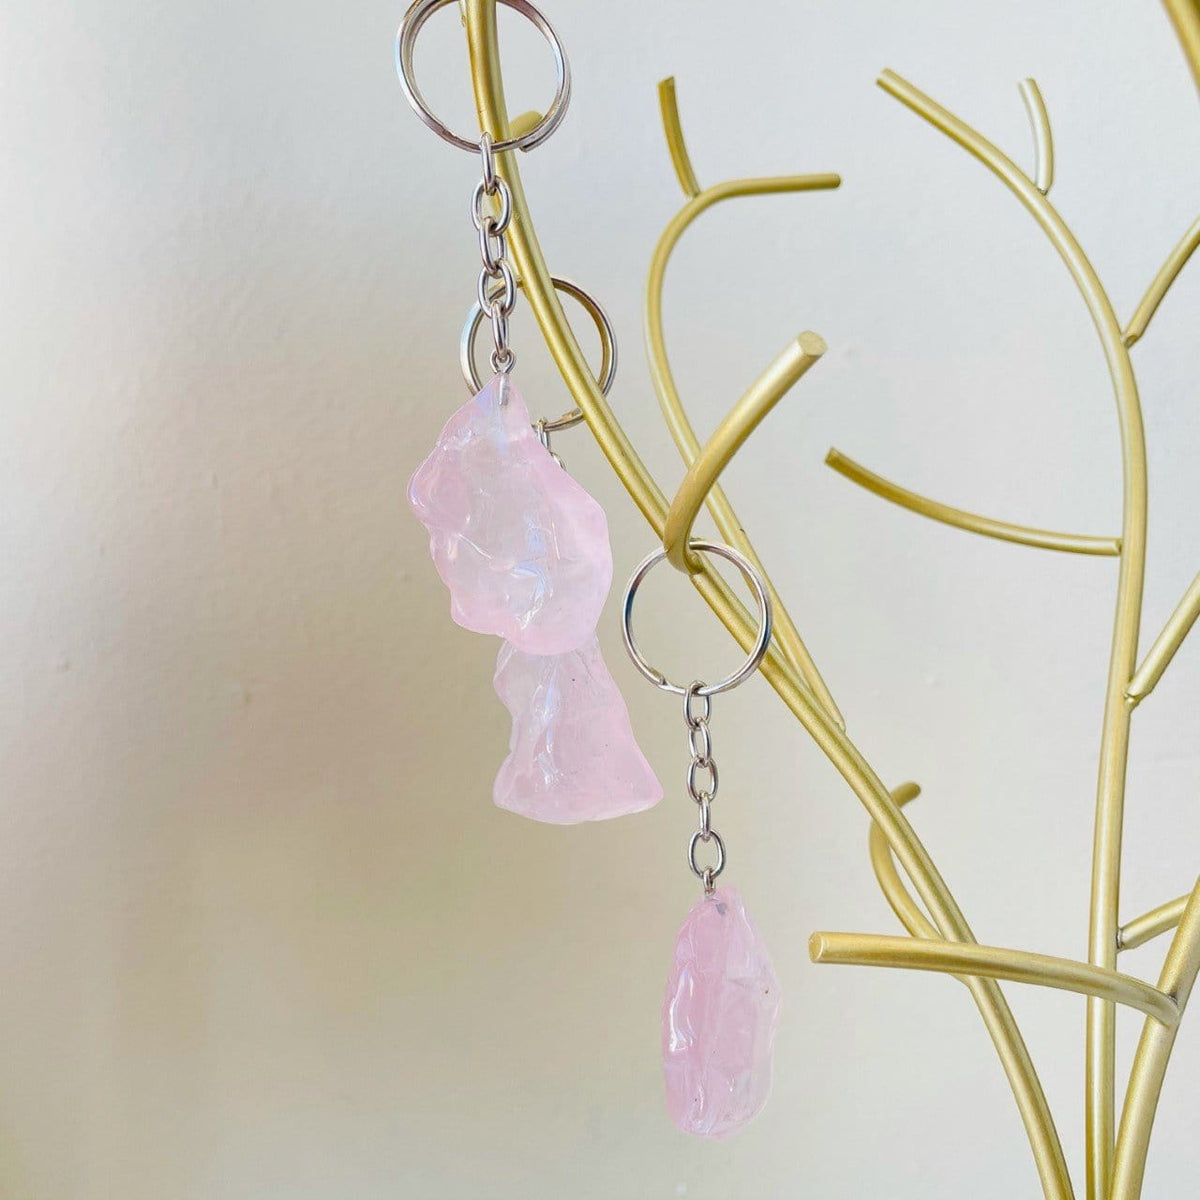 Polished Stone Crystal Keychain Dainty Accessories Grade A Rose Quartz Natural Stone | Tumbled Stone | Worry Stone Crystal Keychains